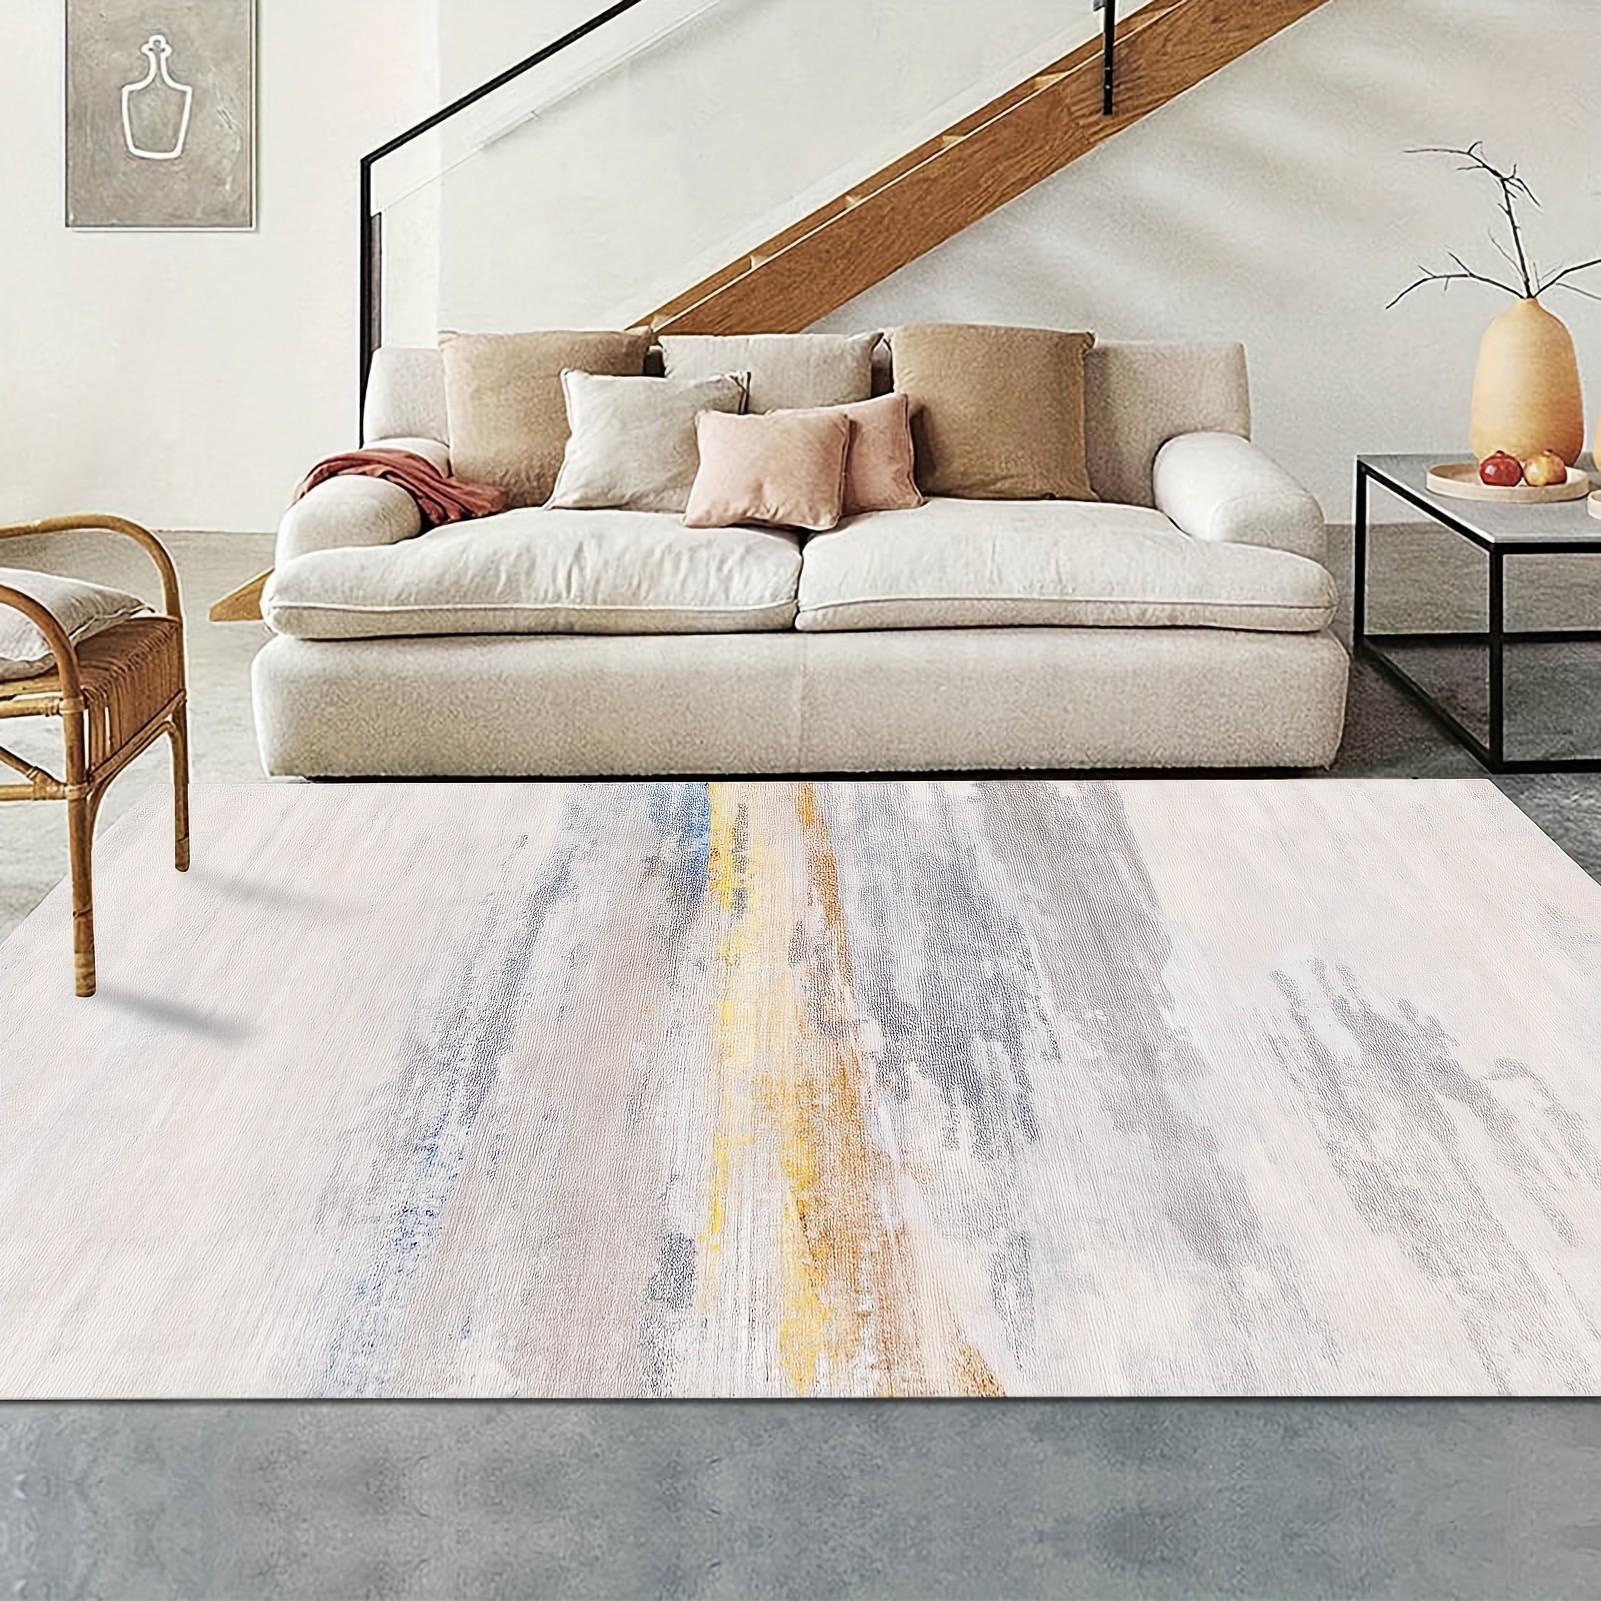 

Abstract Vignetting Area Rugs For Living Room, Bedroom, Hallway, Dining Room, Non-shedding, Non Slip Backing, Floor Decoration Carpets, Gray-golden